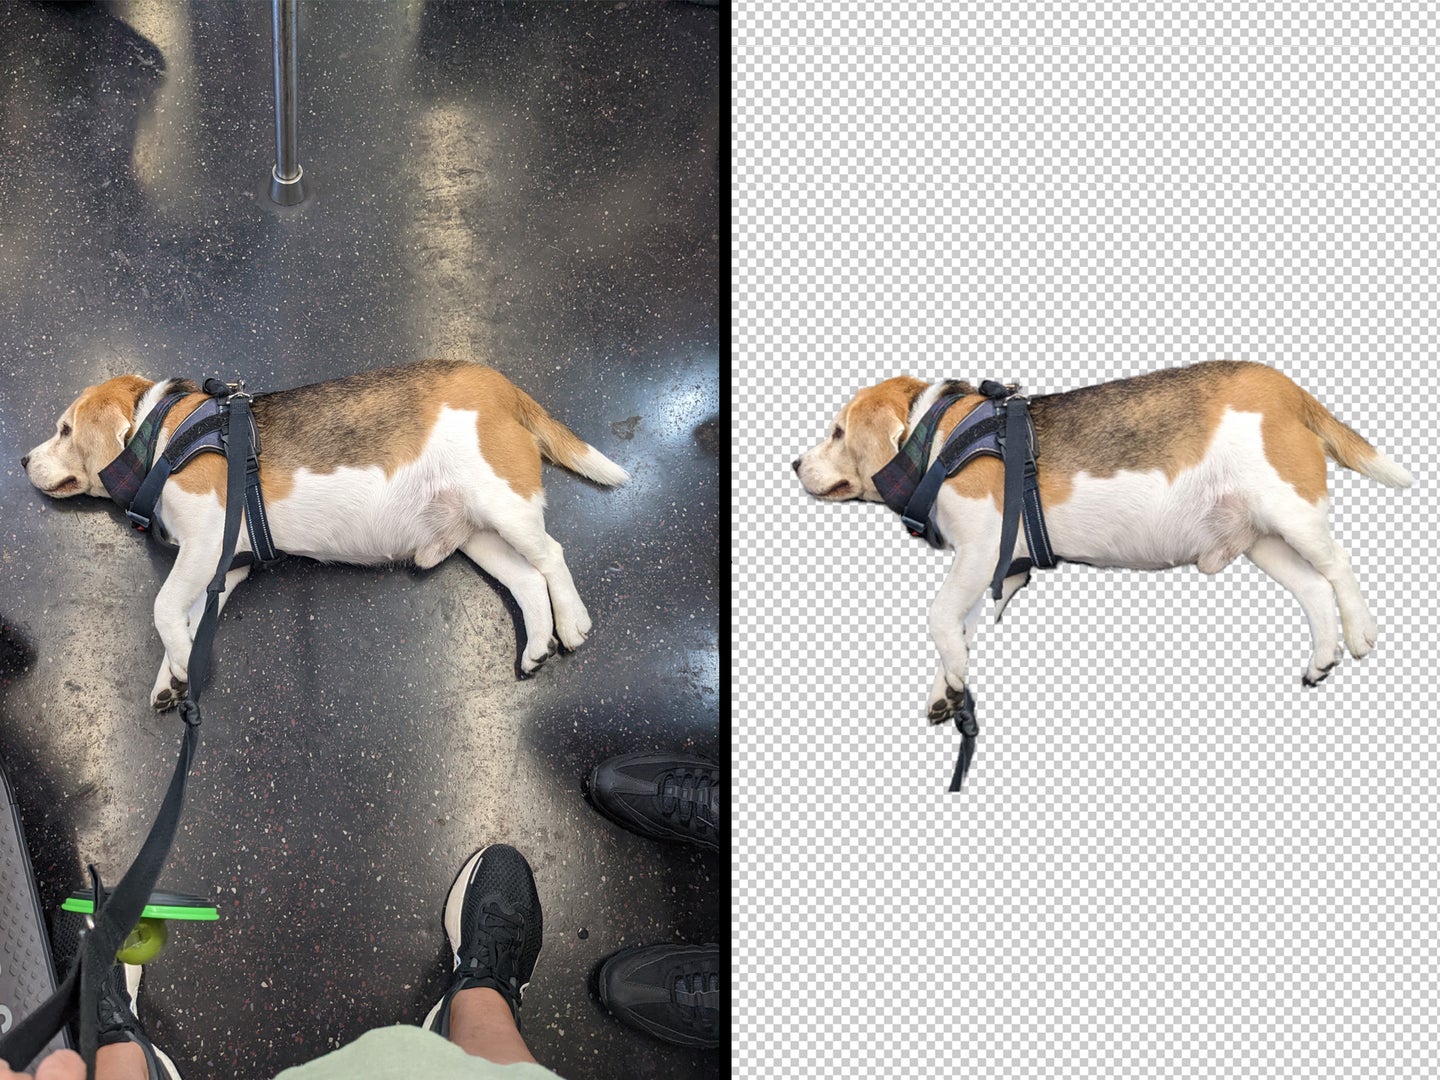 side by side comparison of dog photo with and without background